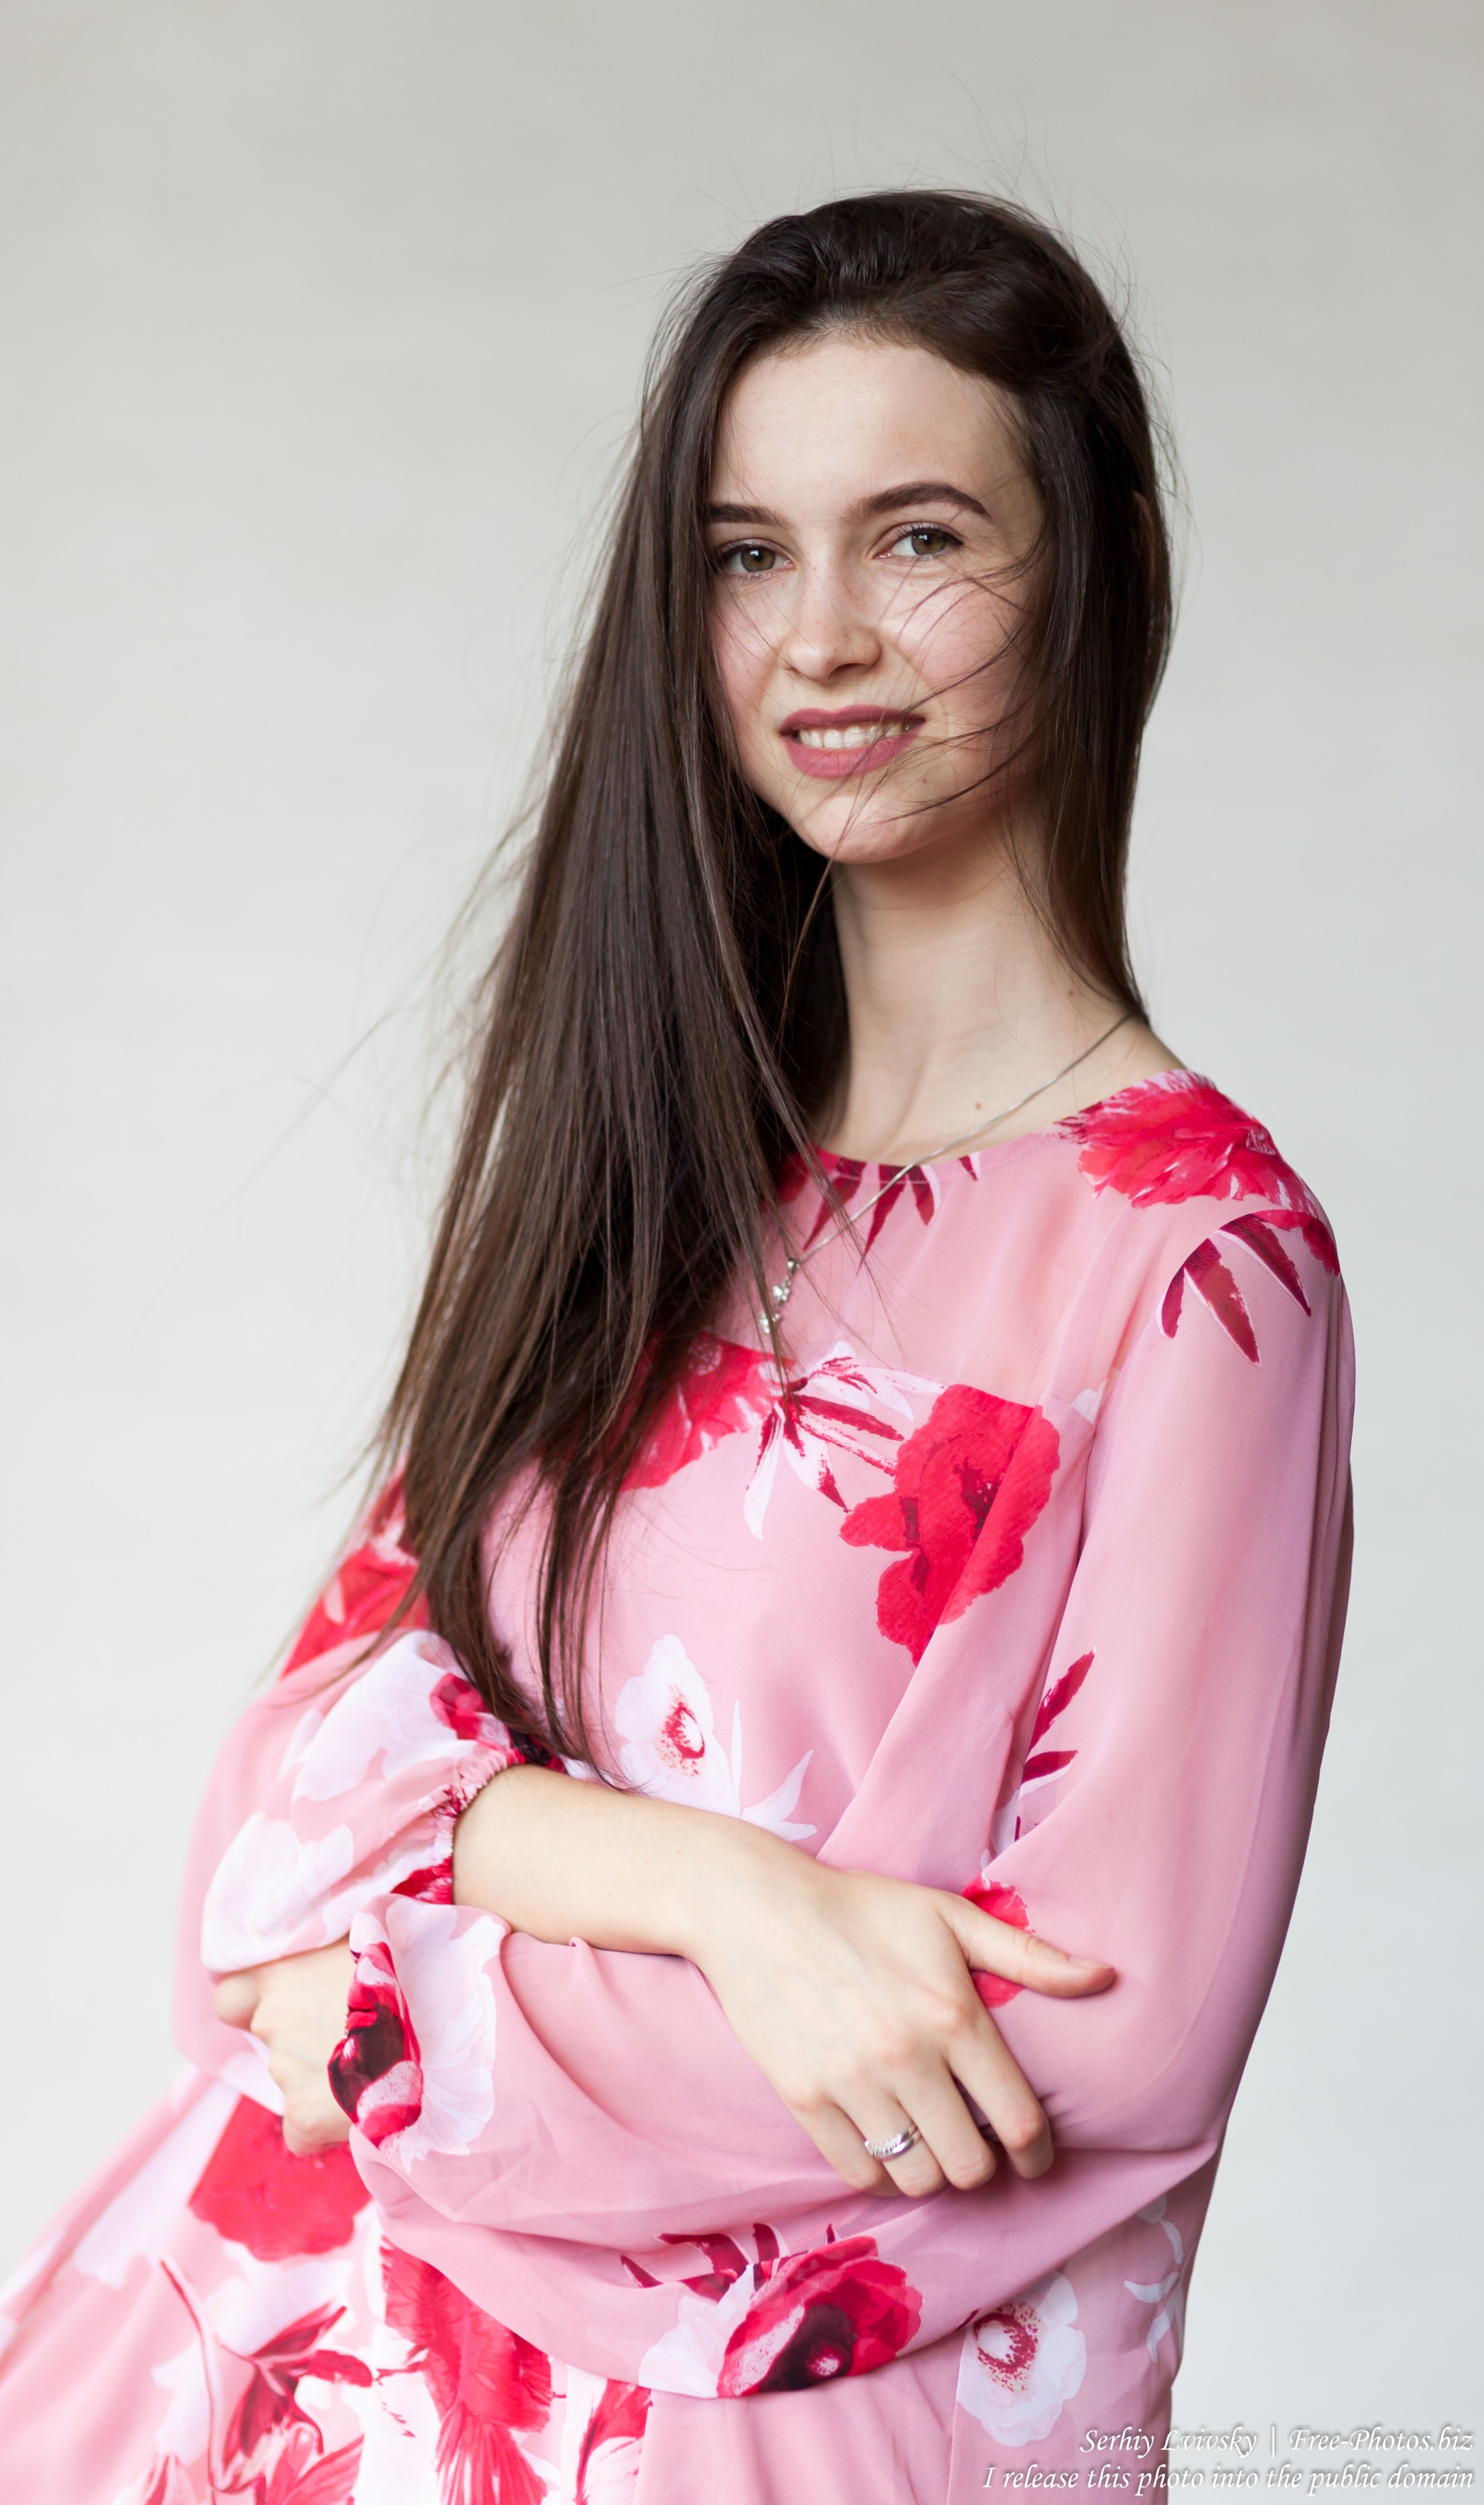 Photo Of Vika A 25 Year Old Brunette Woman Photographed By Serhiy Lvivsky In July 2018 Picture 43